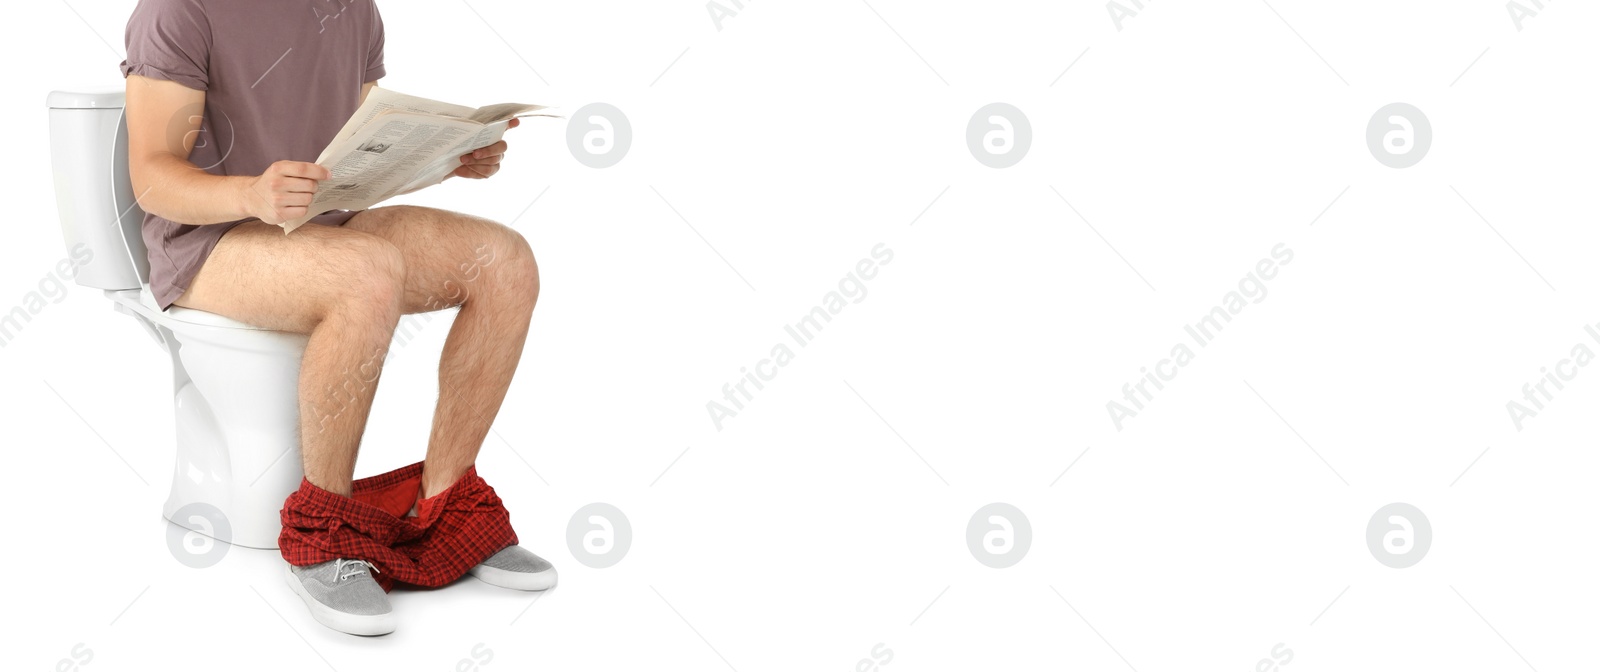 Image of Closeup view of man reading newspaper while sitting on toilet bowl against white background. Banner design